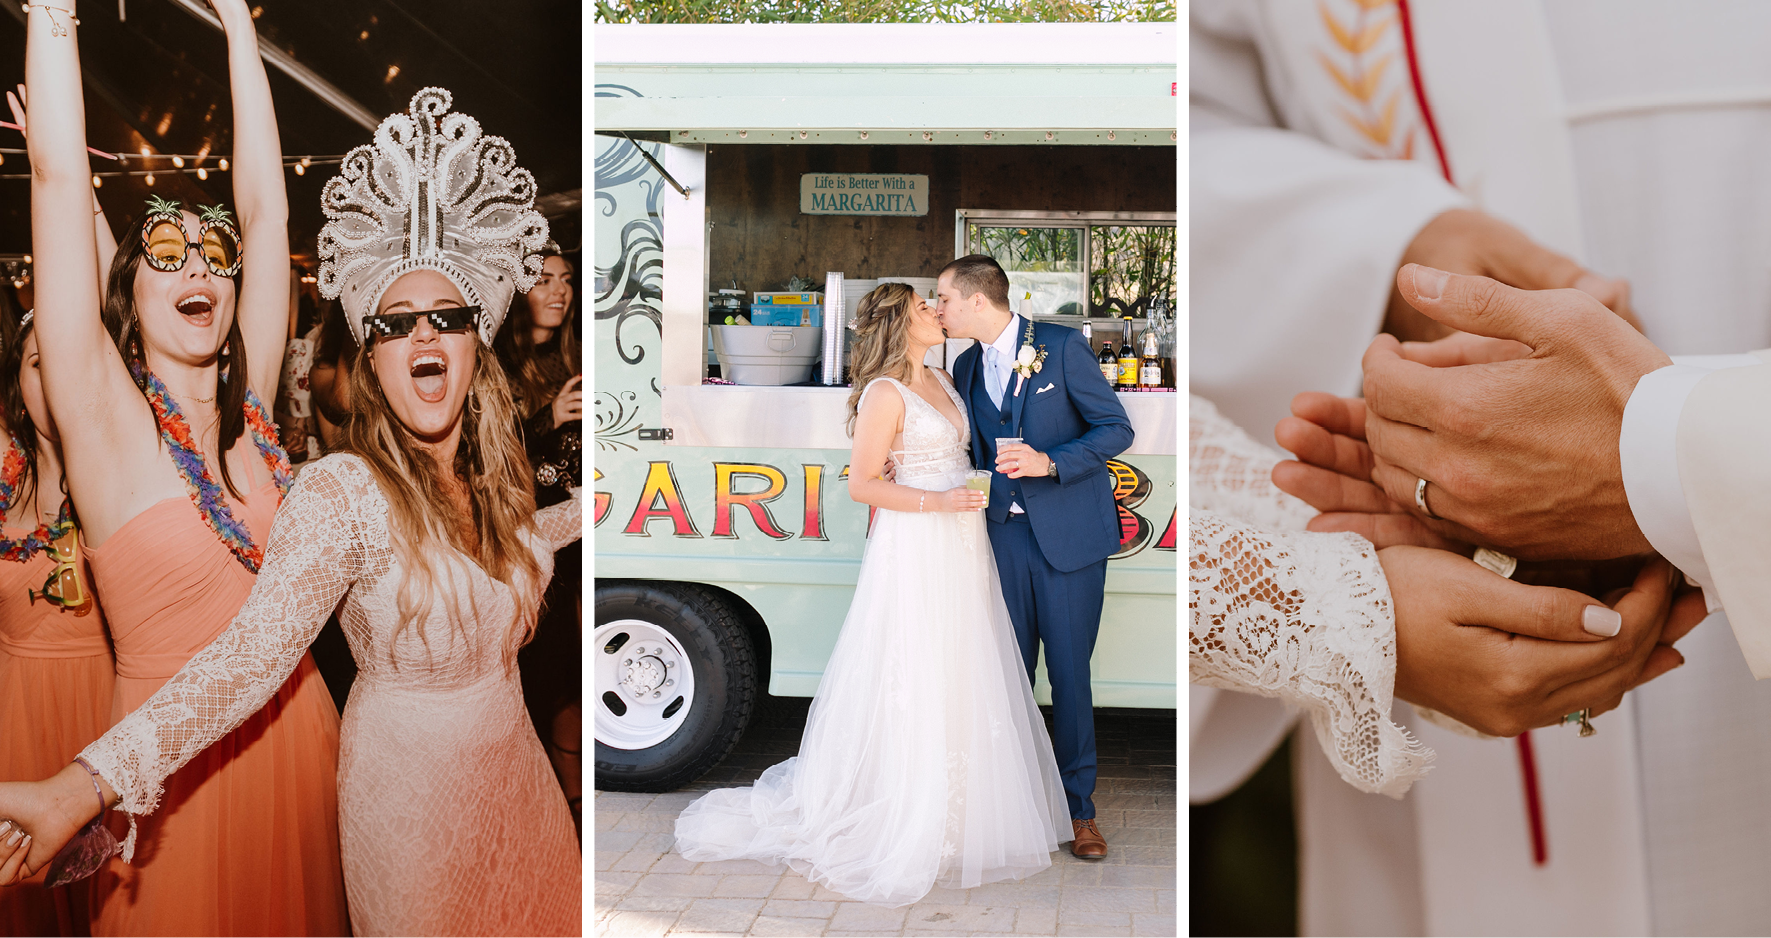 Collage of Hispanic Bride Dancing and Hispanic Bride Kissing the Groom and Hands Exchanging Coins